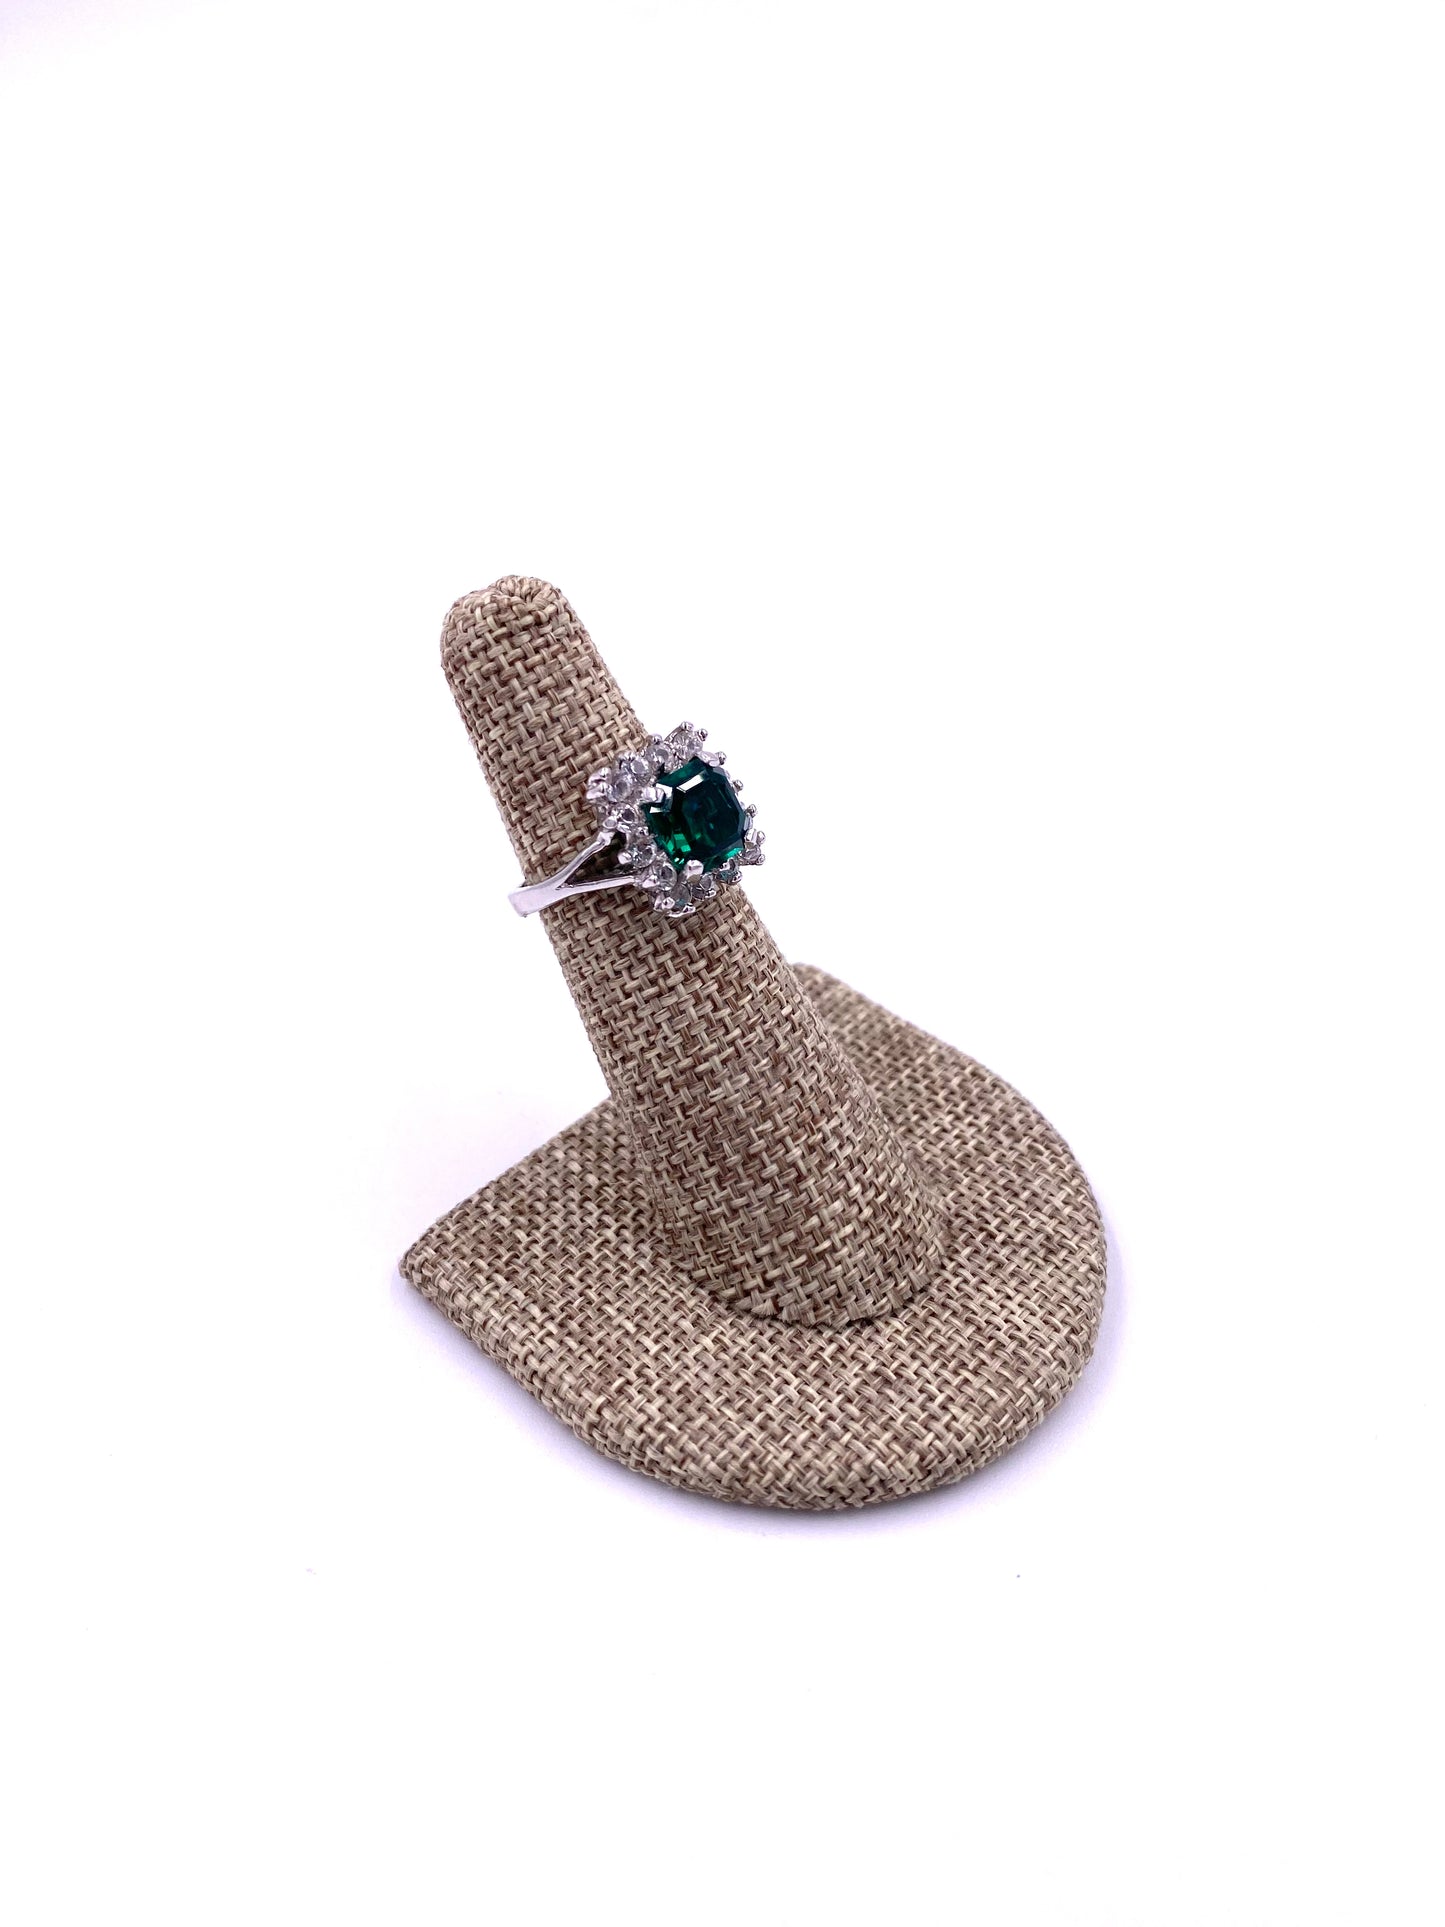 Emerald with Diamond Cocktail Ring